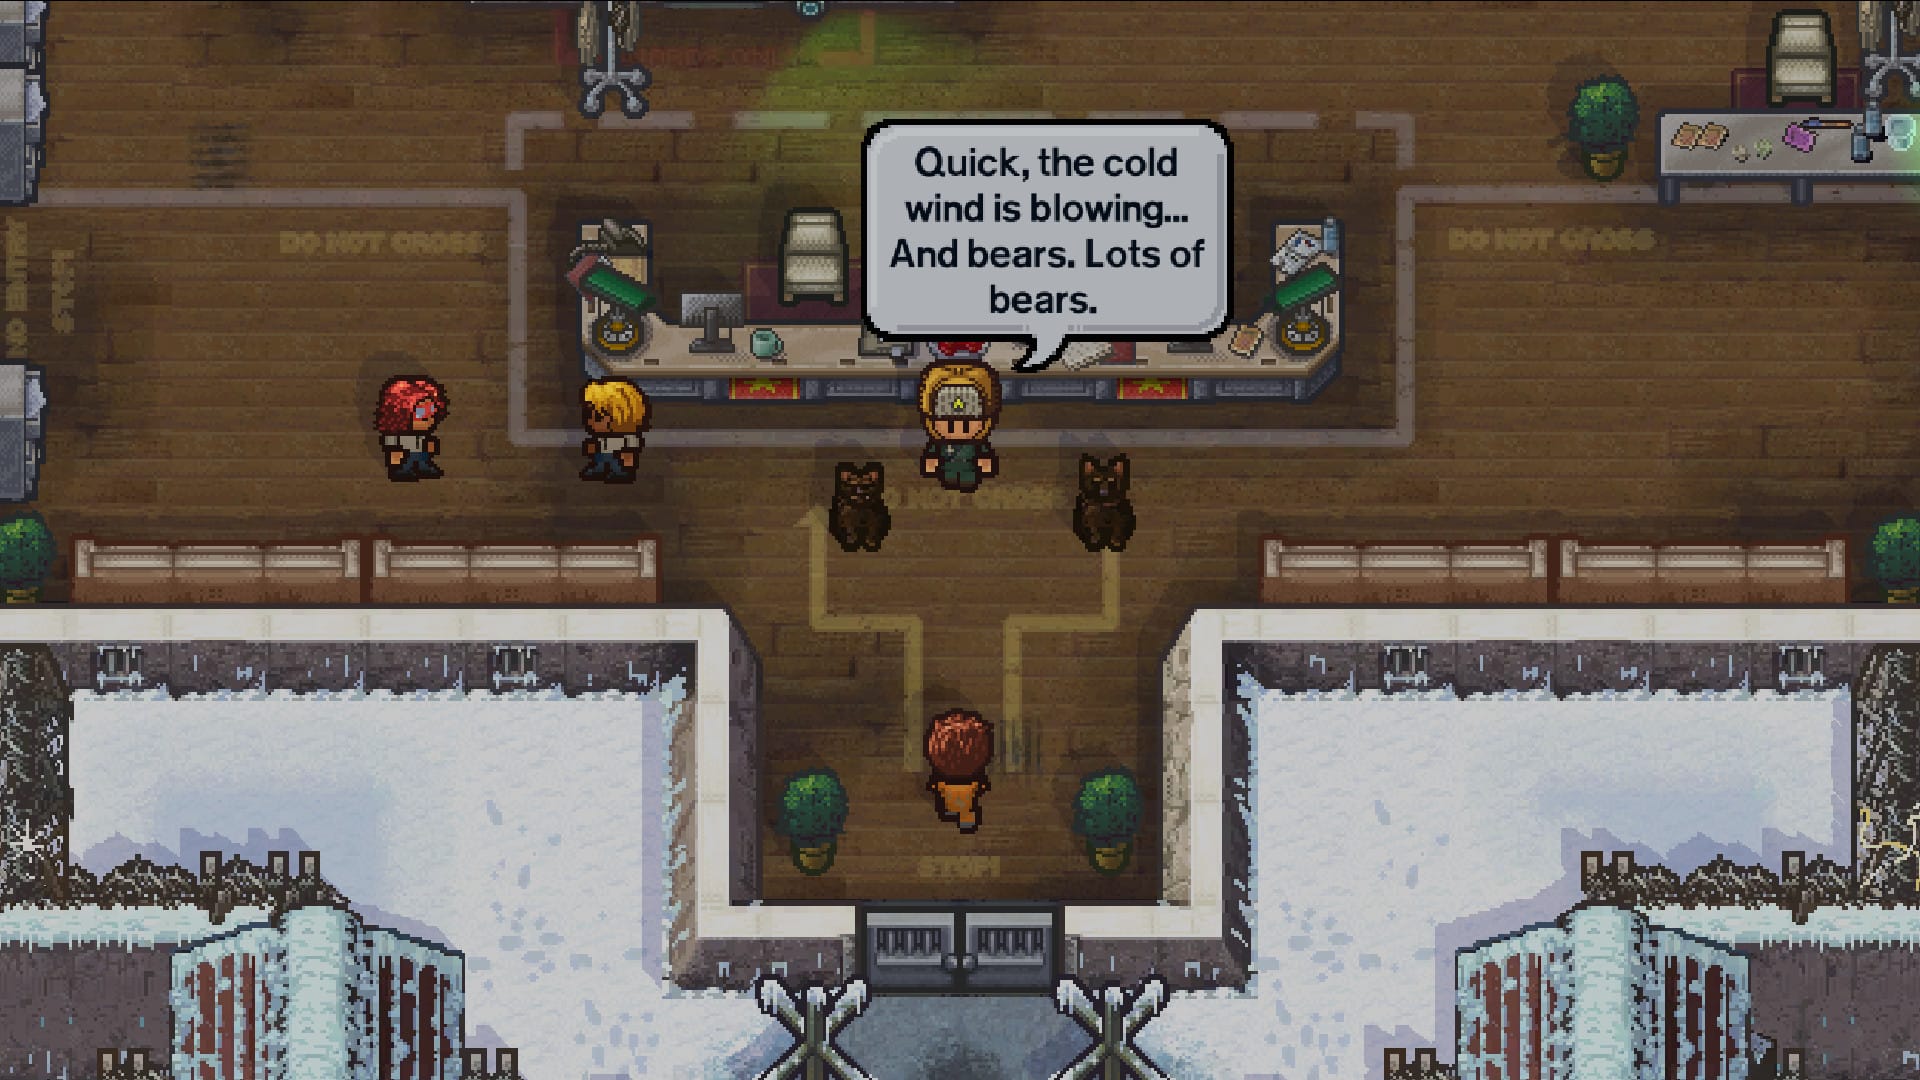 free download the escapists online